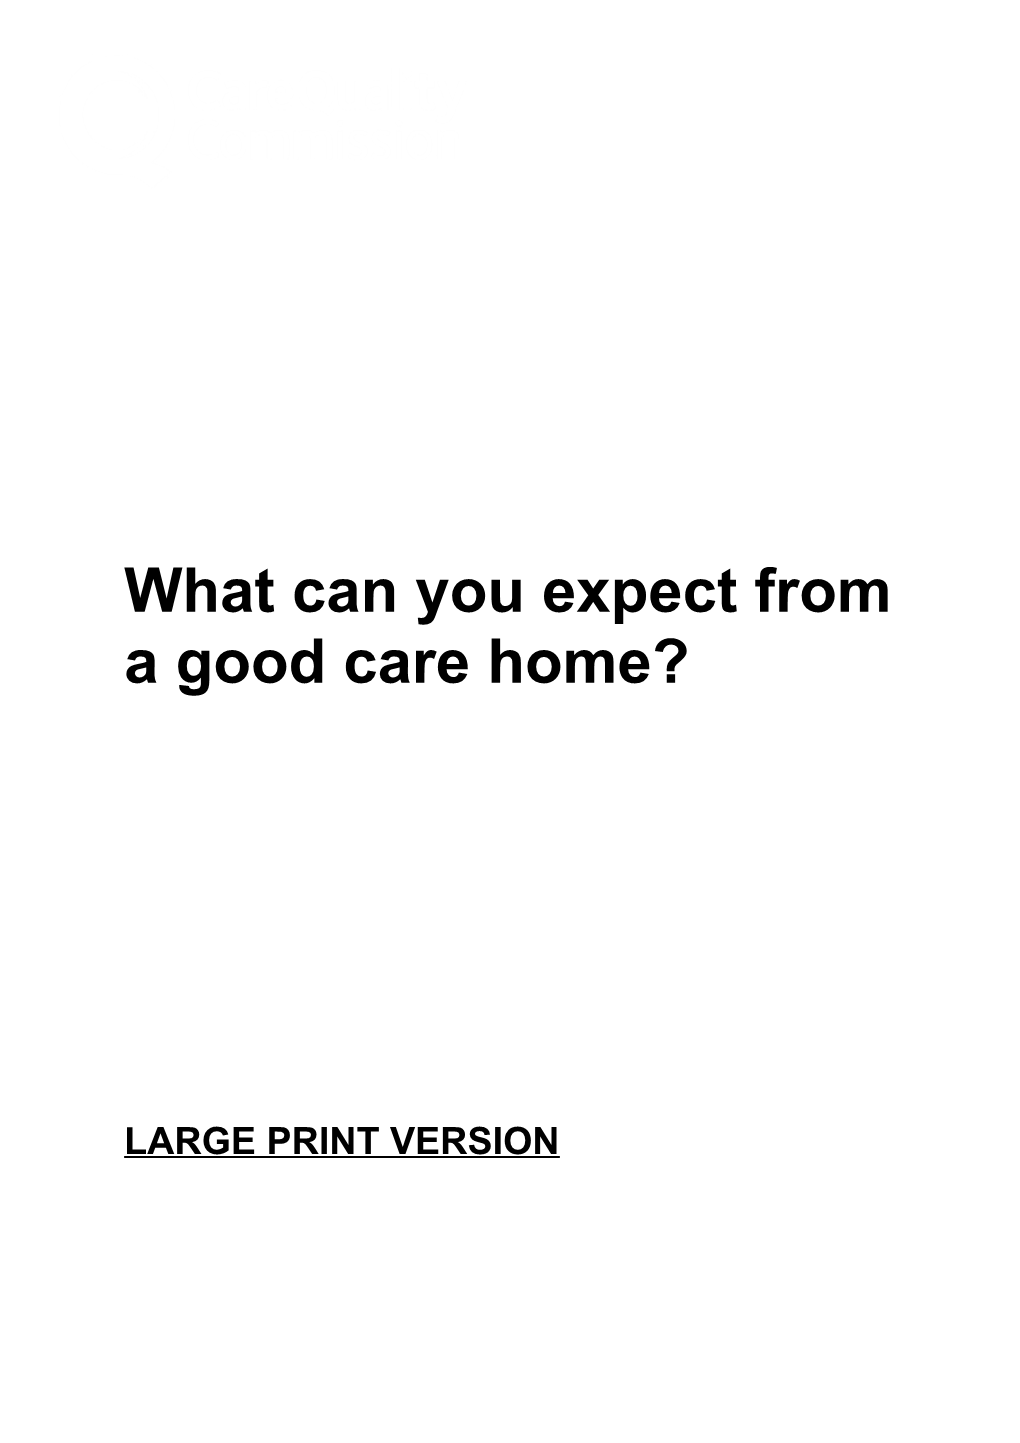 What Can You Expect from a Good Care Home?